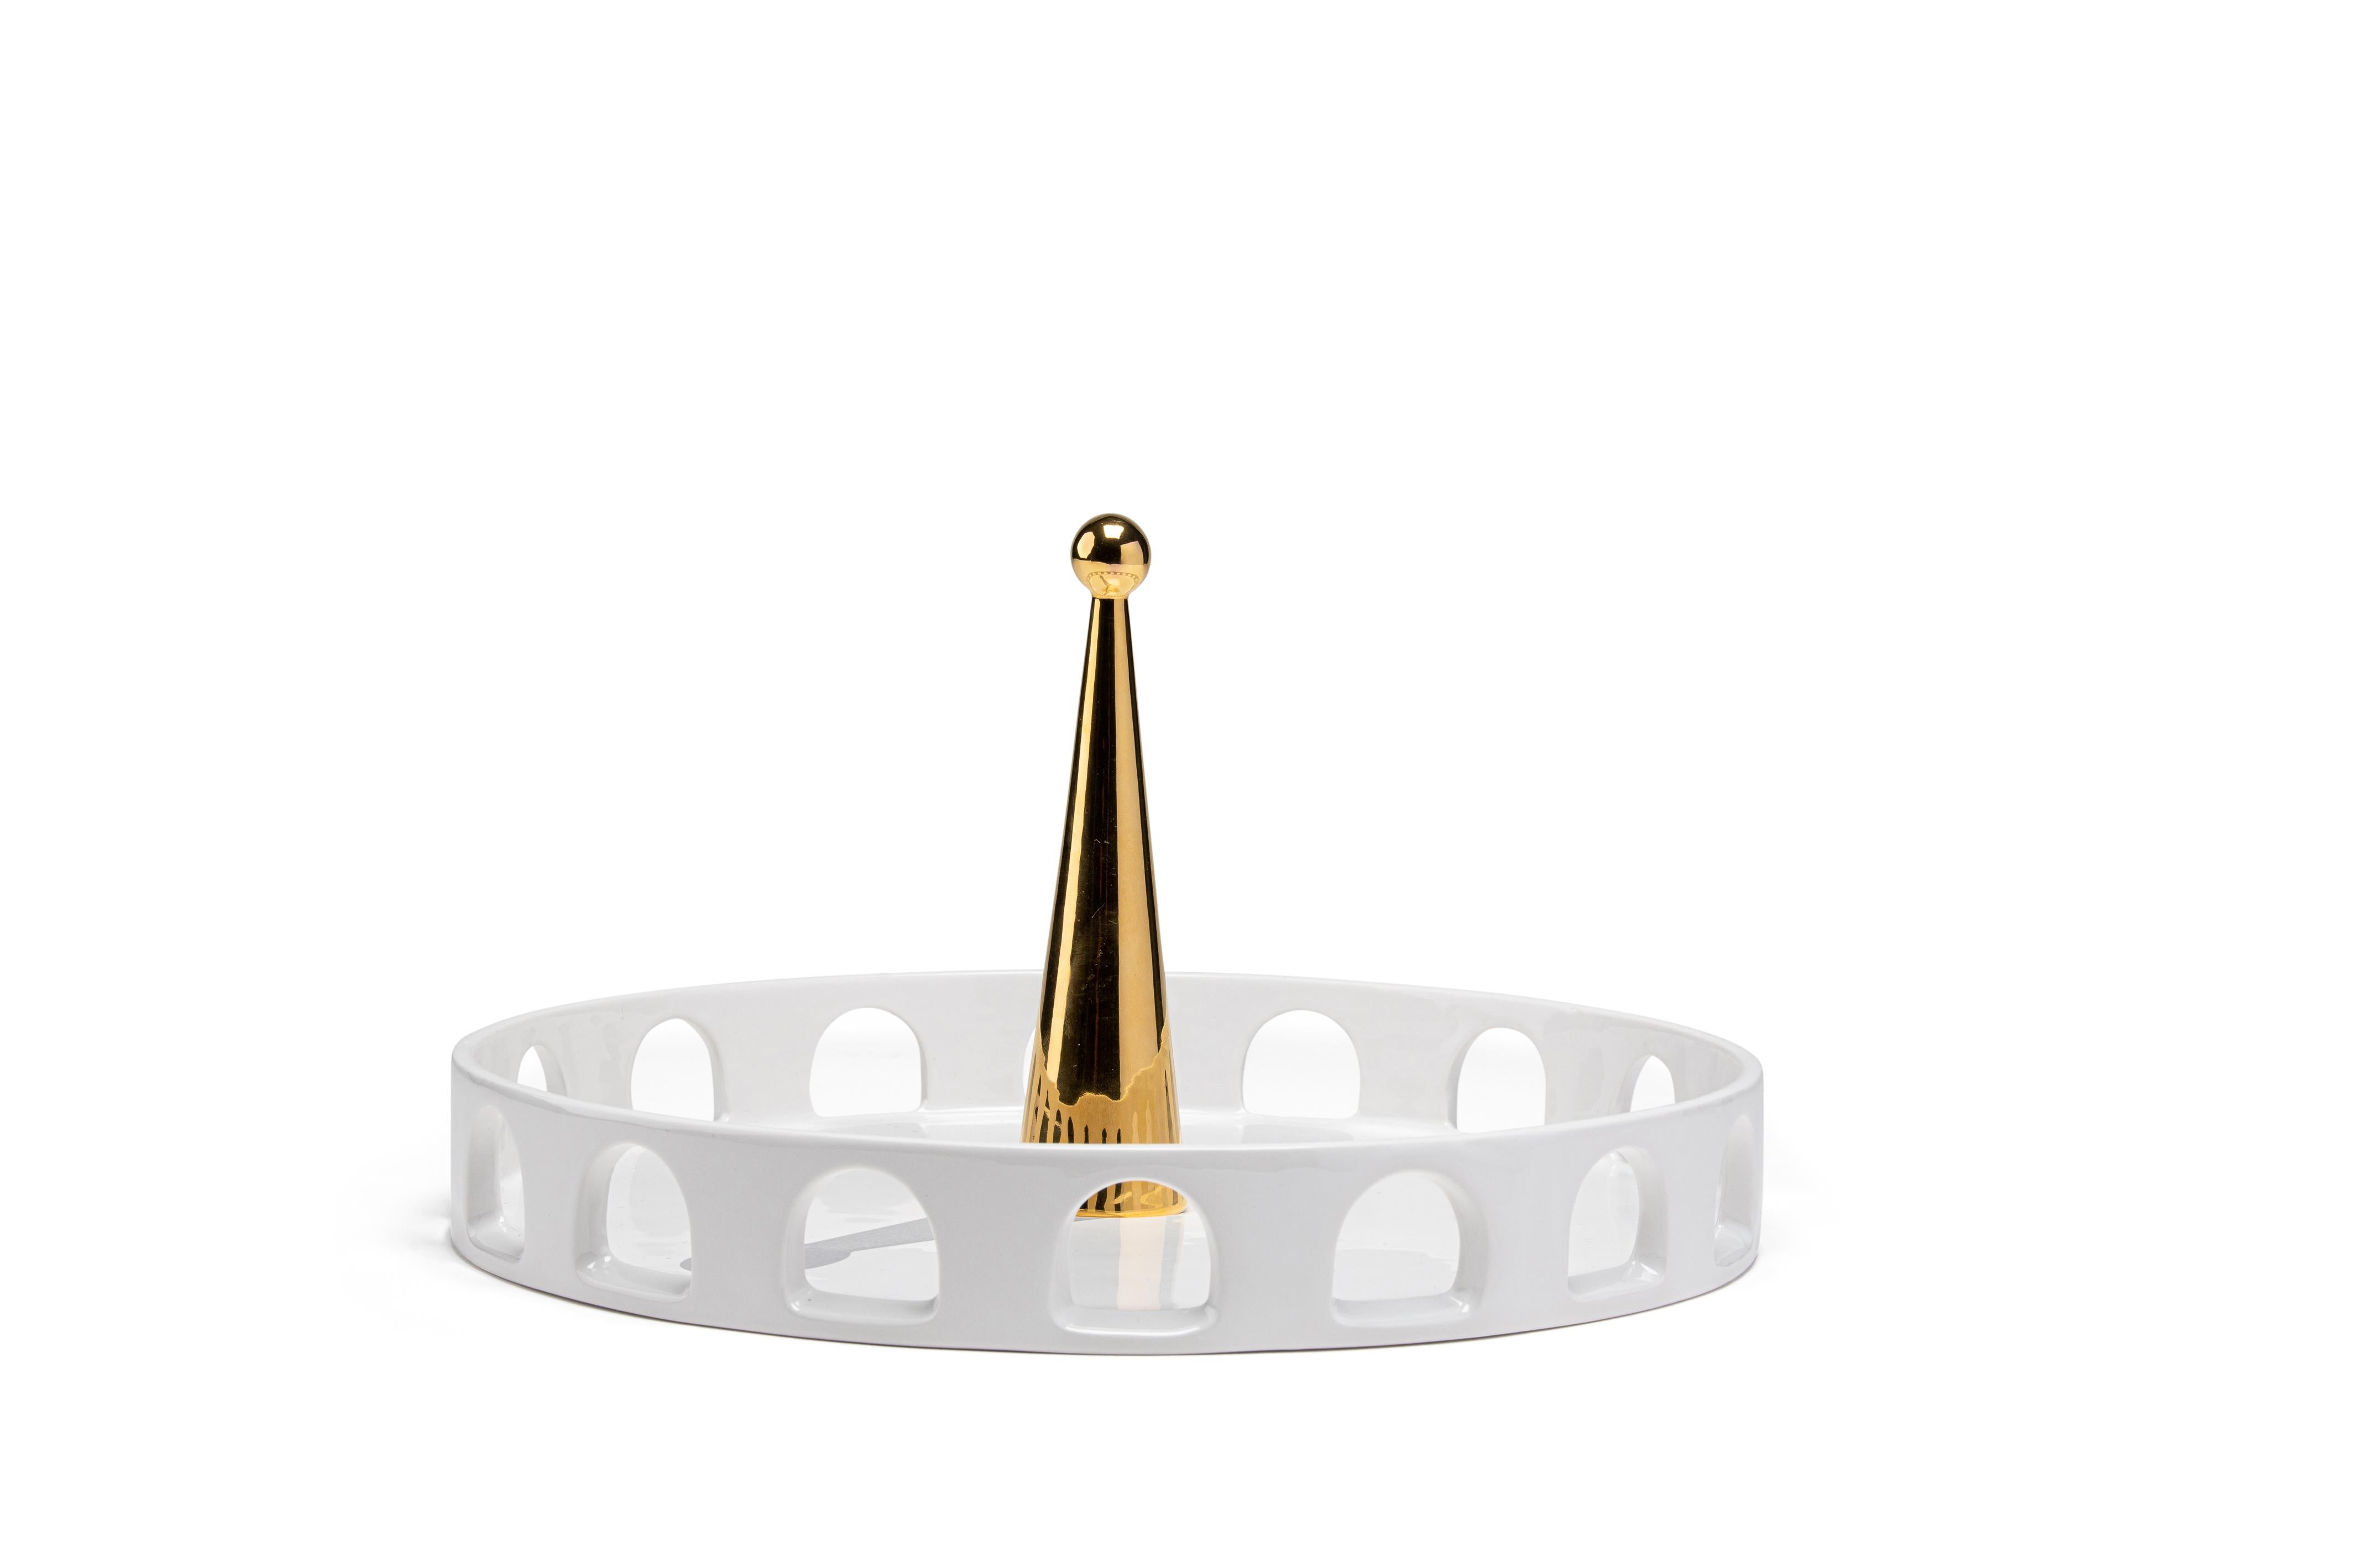 The tray 06:45 of the 'Meridiane' collection recalls typical shapes of Classic Italian architecture. The white ceramic arena is the background for an obelisk painted in 24-karat gold that casts its shadow which is painted on the horizontal